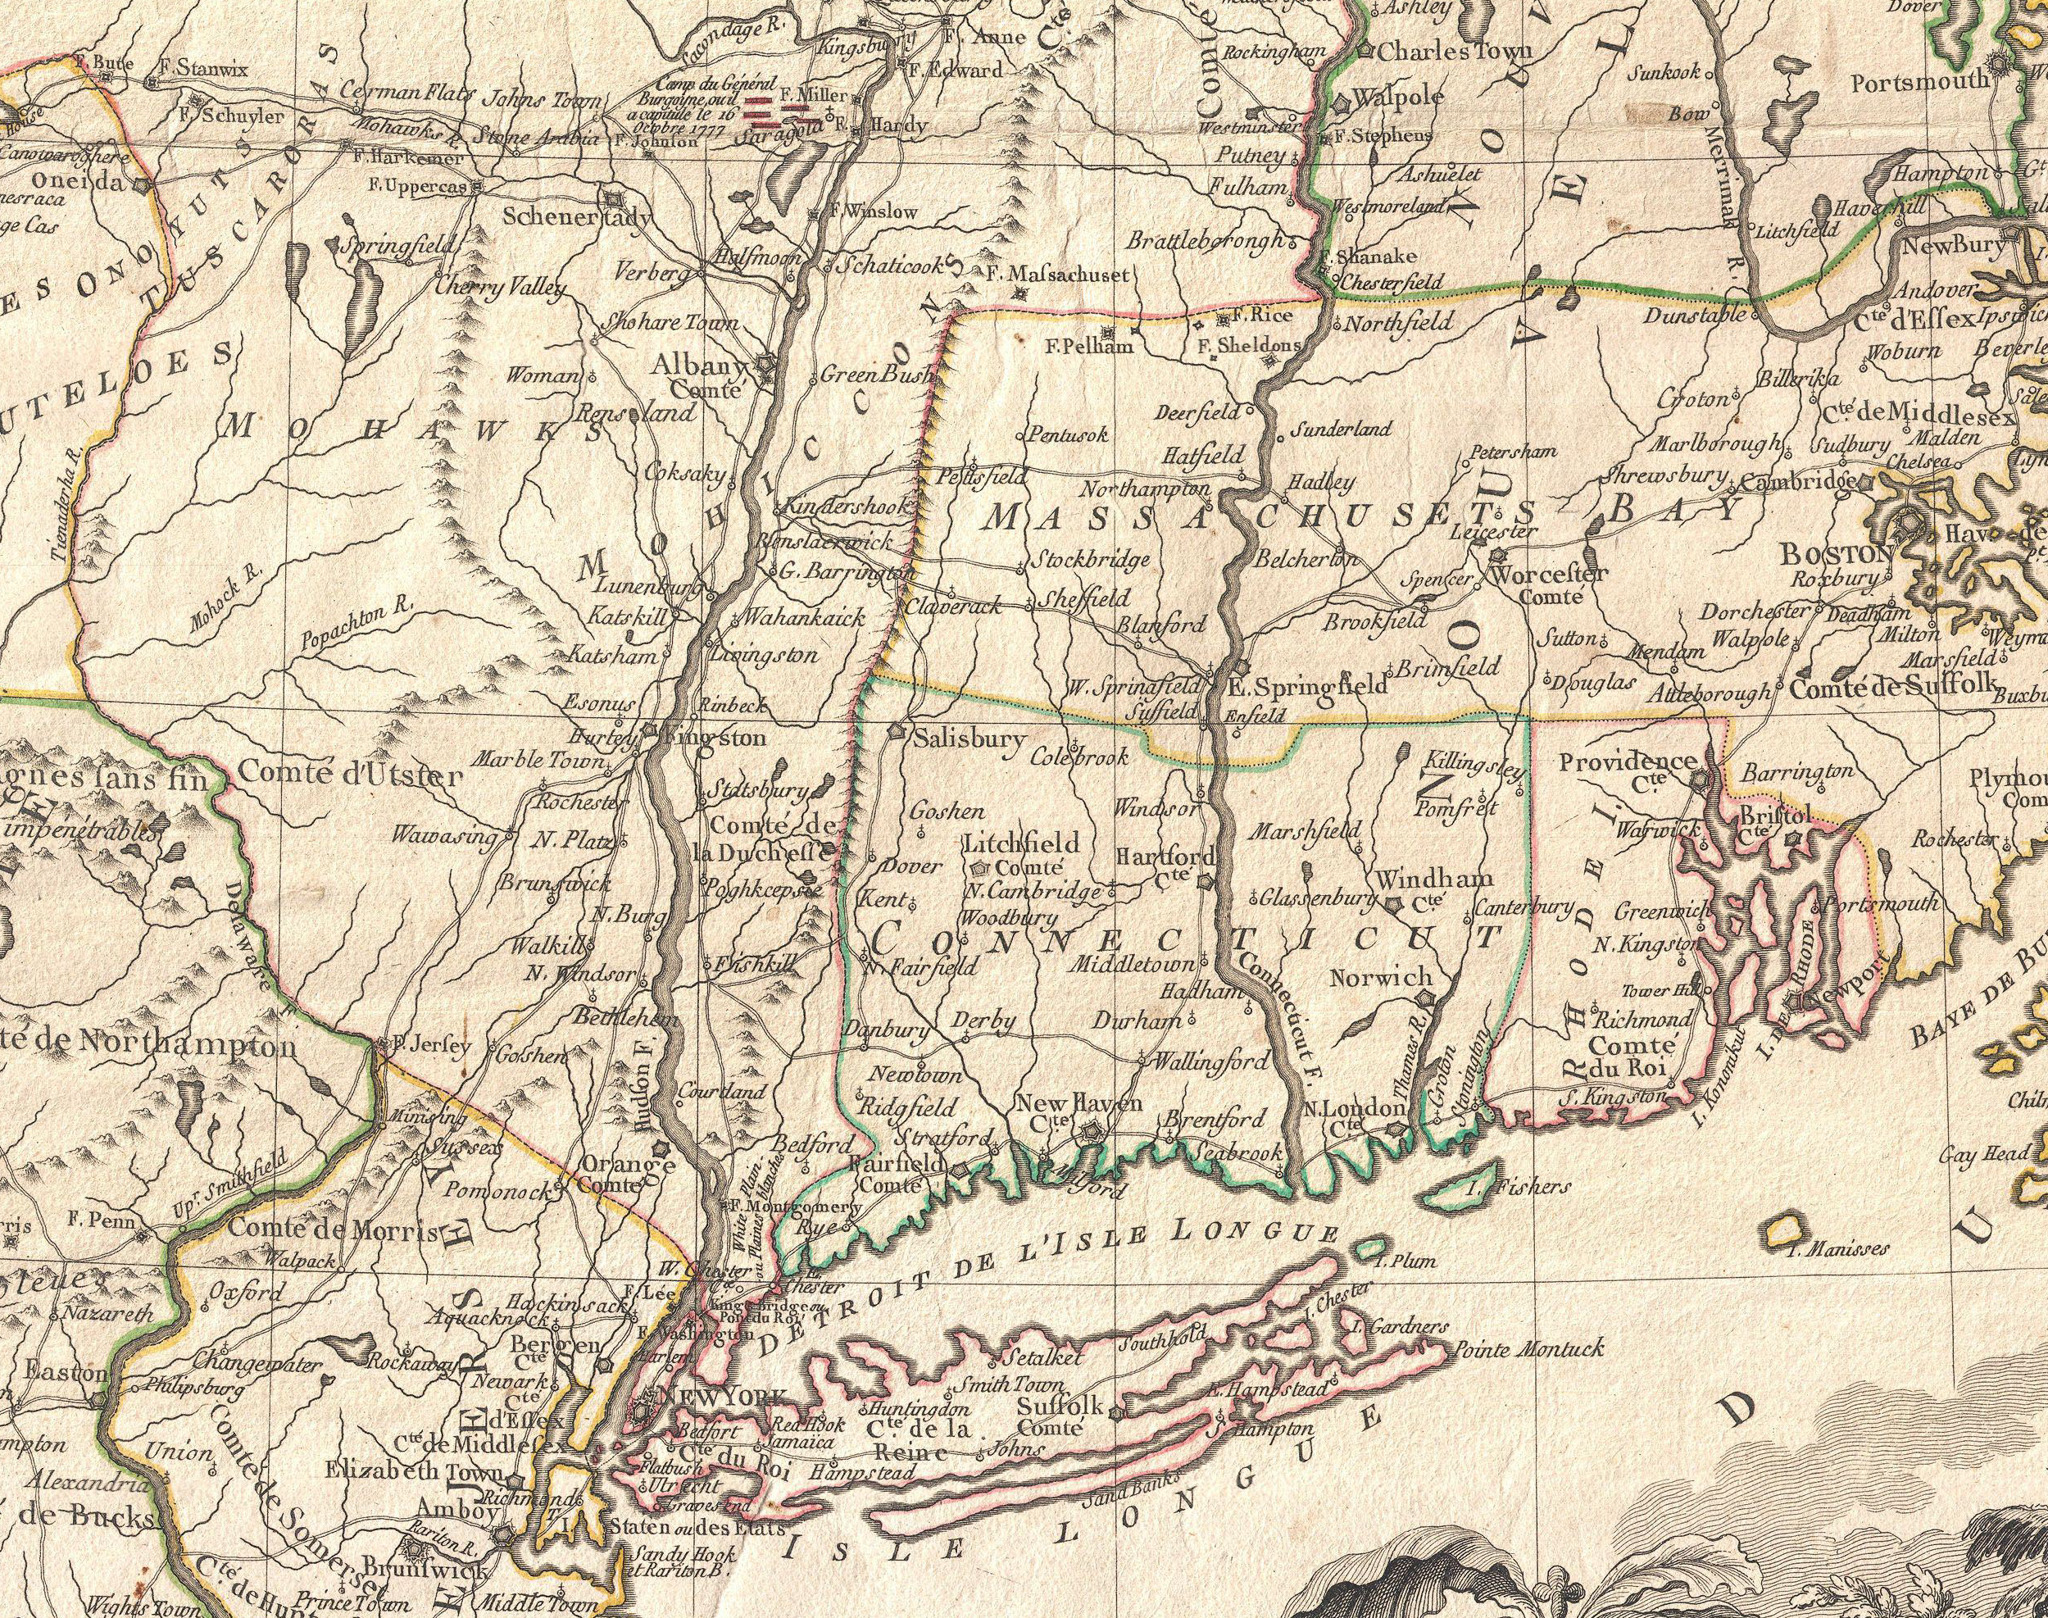 1777 Map of New York and New England (Revolutionary_War) by Brio